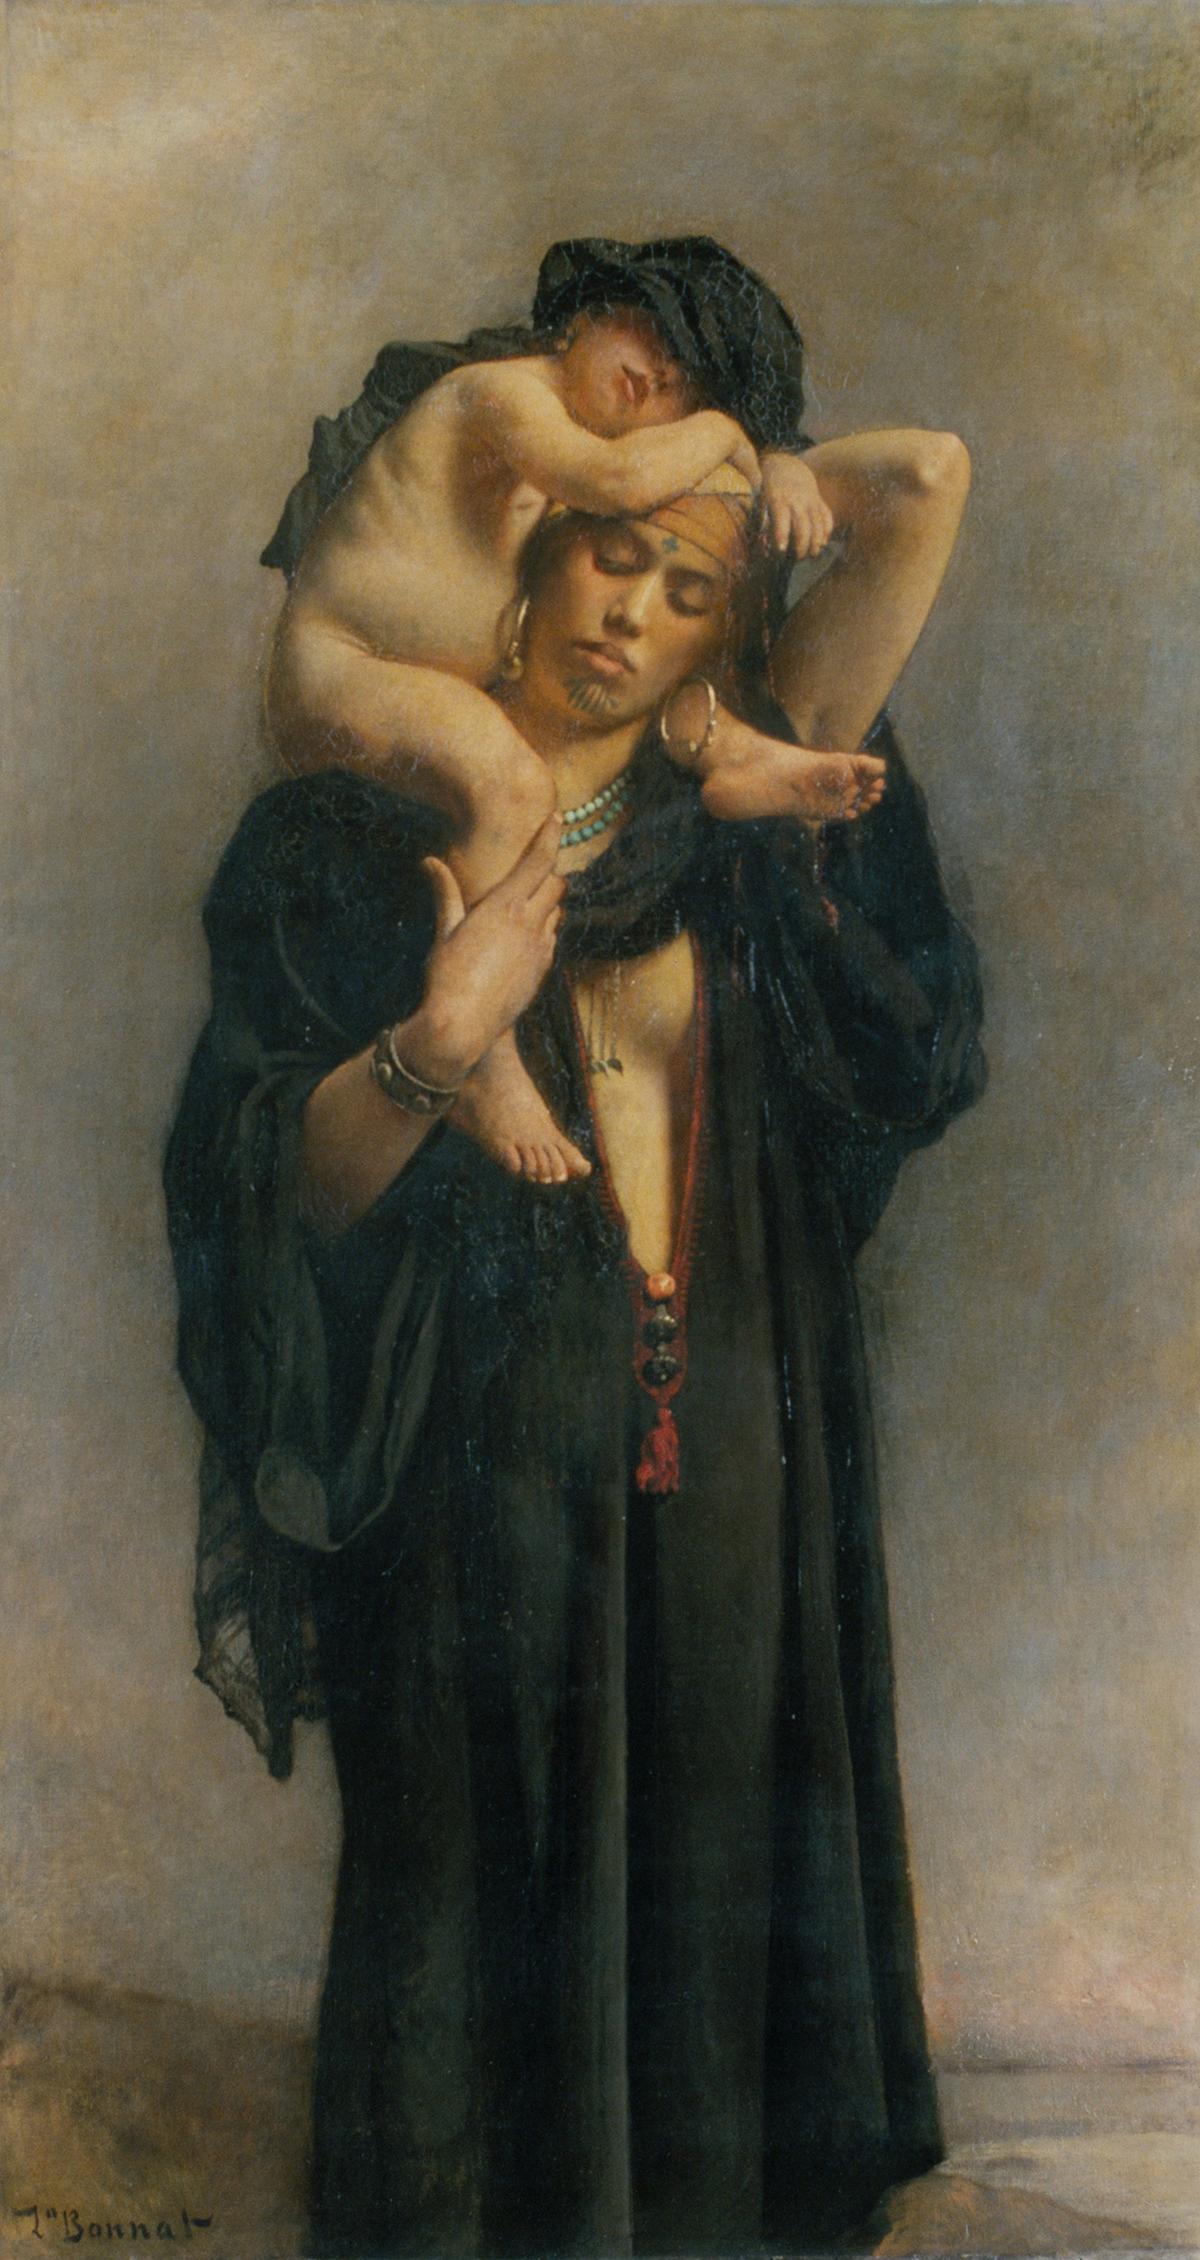 "An Egyptian Peasant Woman and Her Child," 1869–1870, by Léon Bonnat. Oil on canvas; 73 1/2 inches by 41 1/2 inches. The Metropolitan Museum of Art, New York City. (Public Domain)